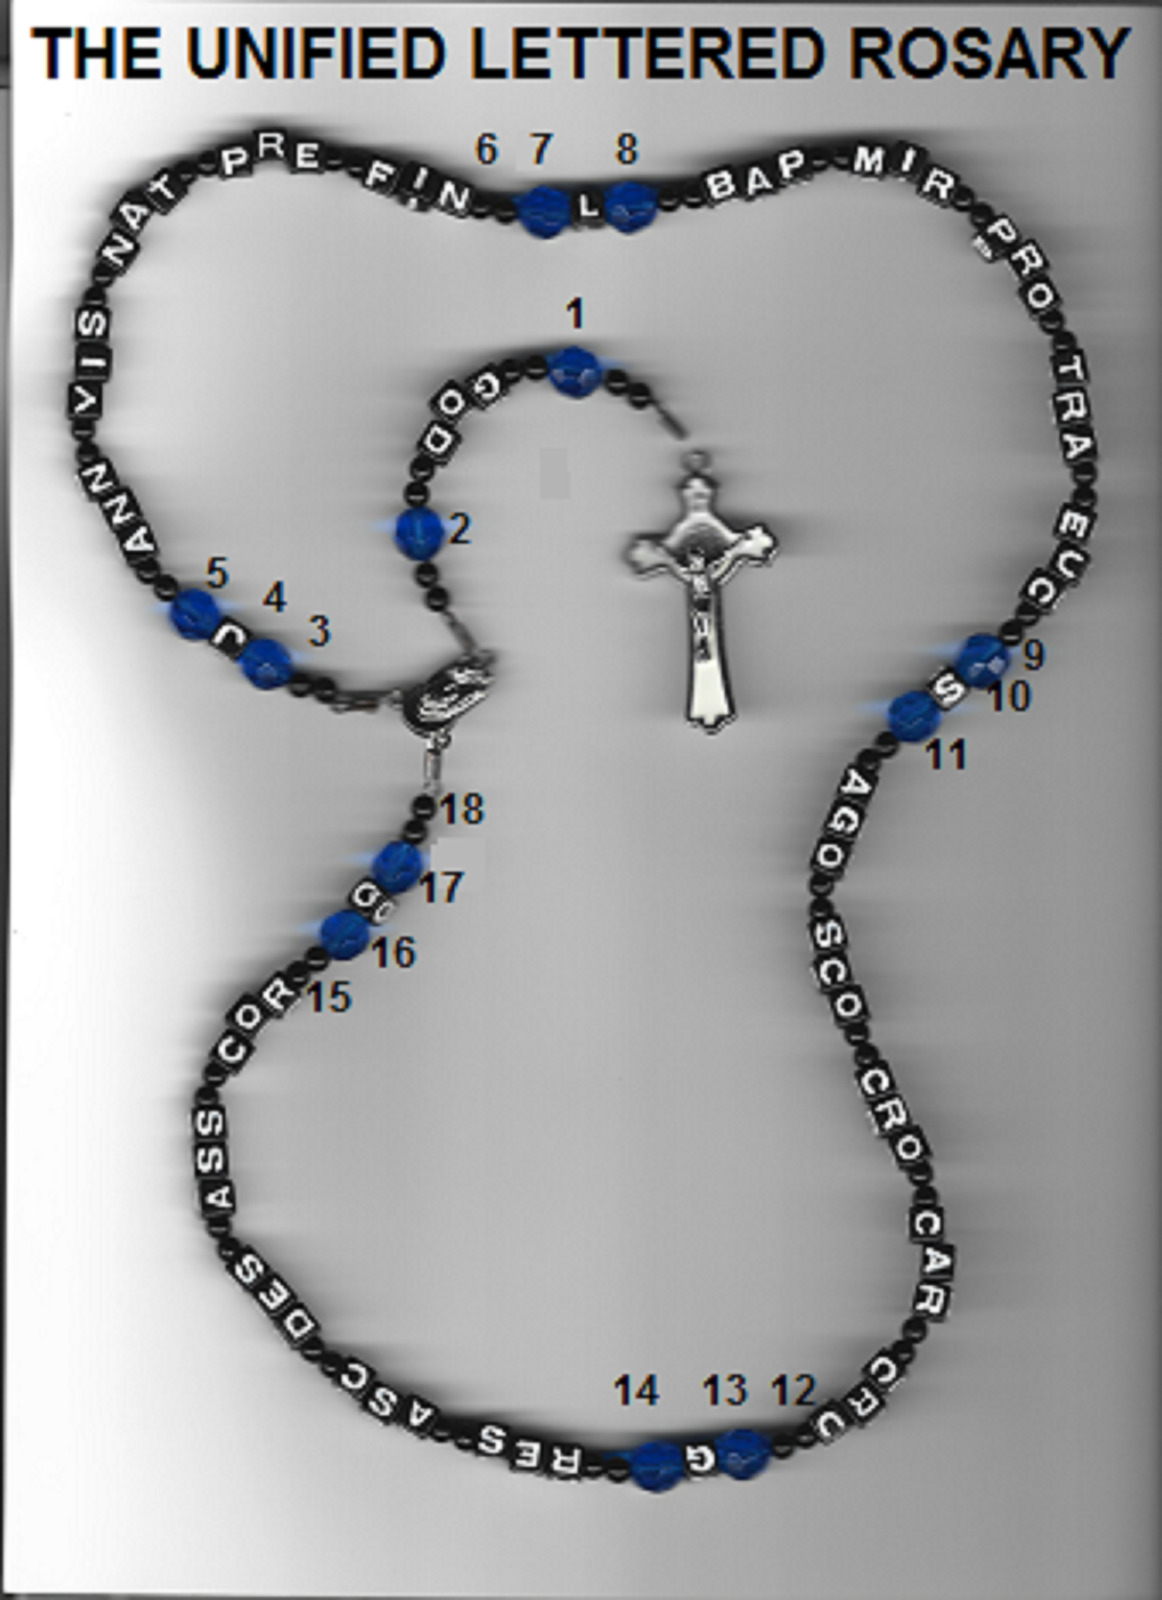 Unified Lettered Rosary, 7 mm black cubic beads, complete w/20 abbrev. mysteries